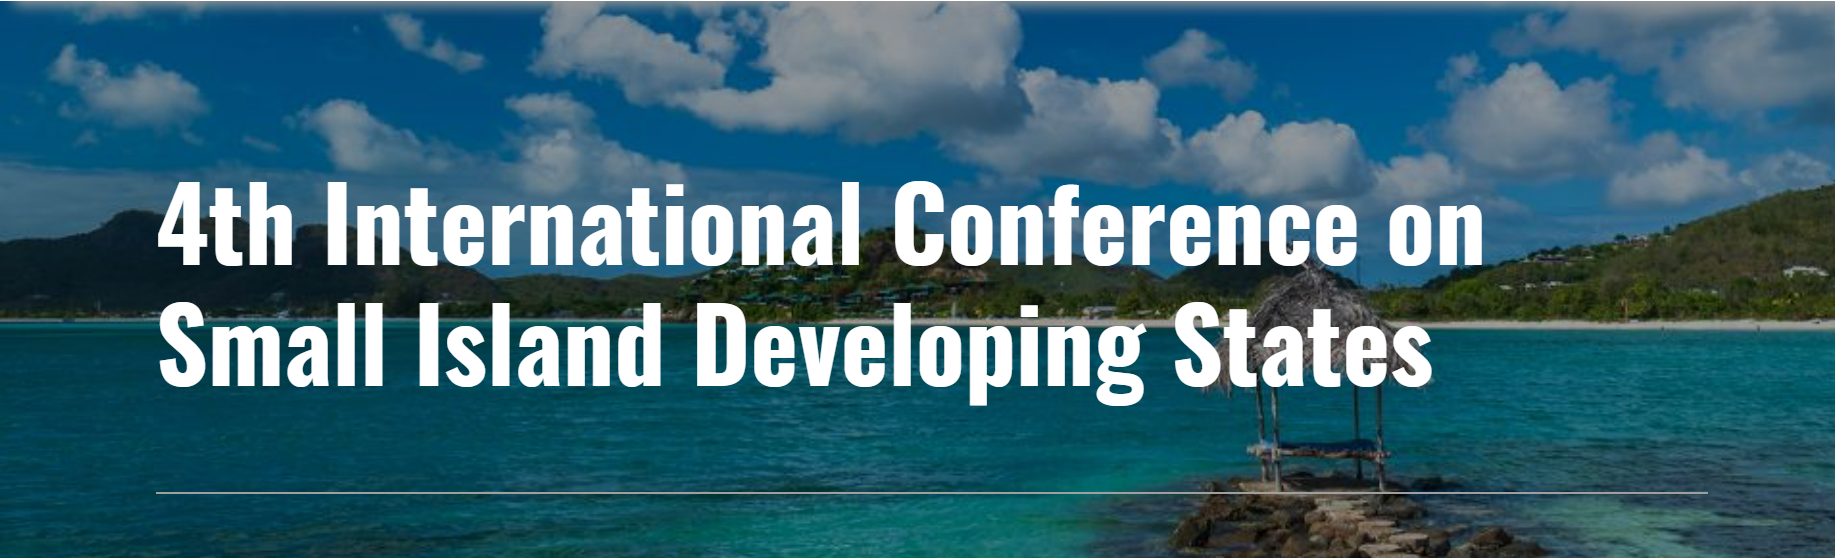 4th International Conference on Small Island Developing States